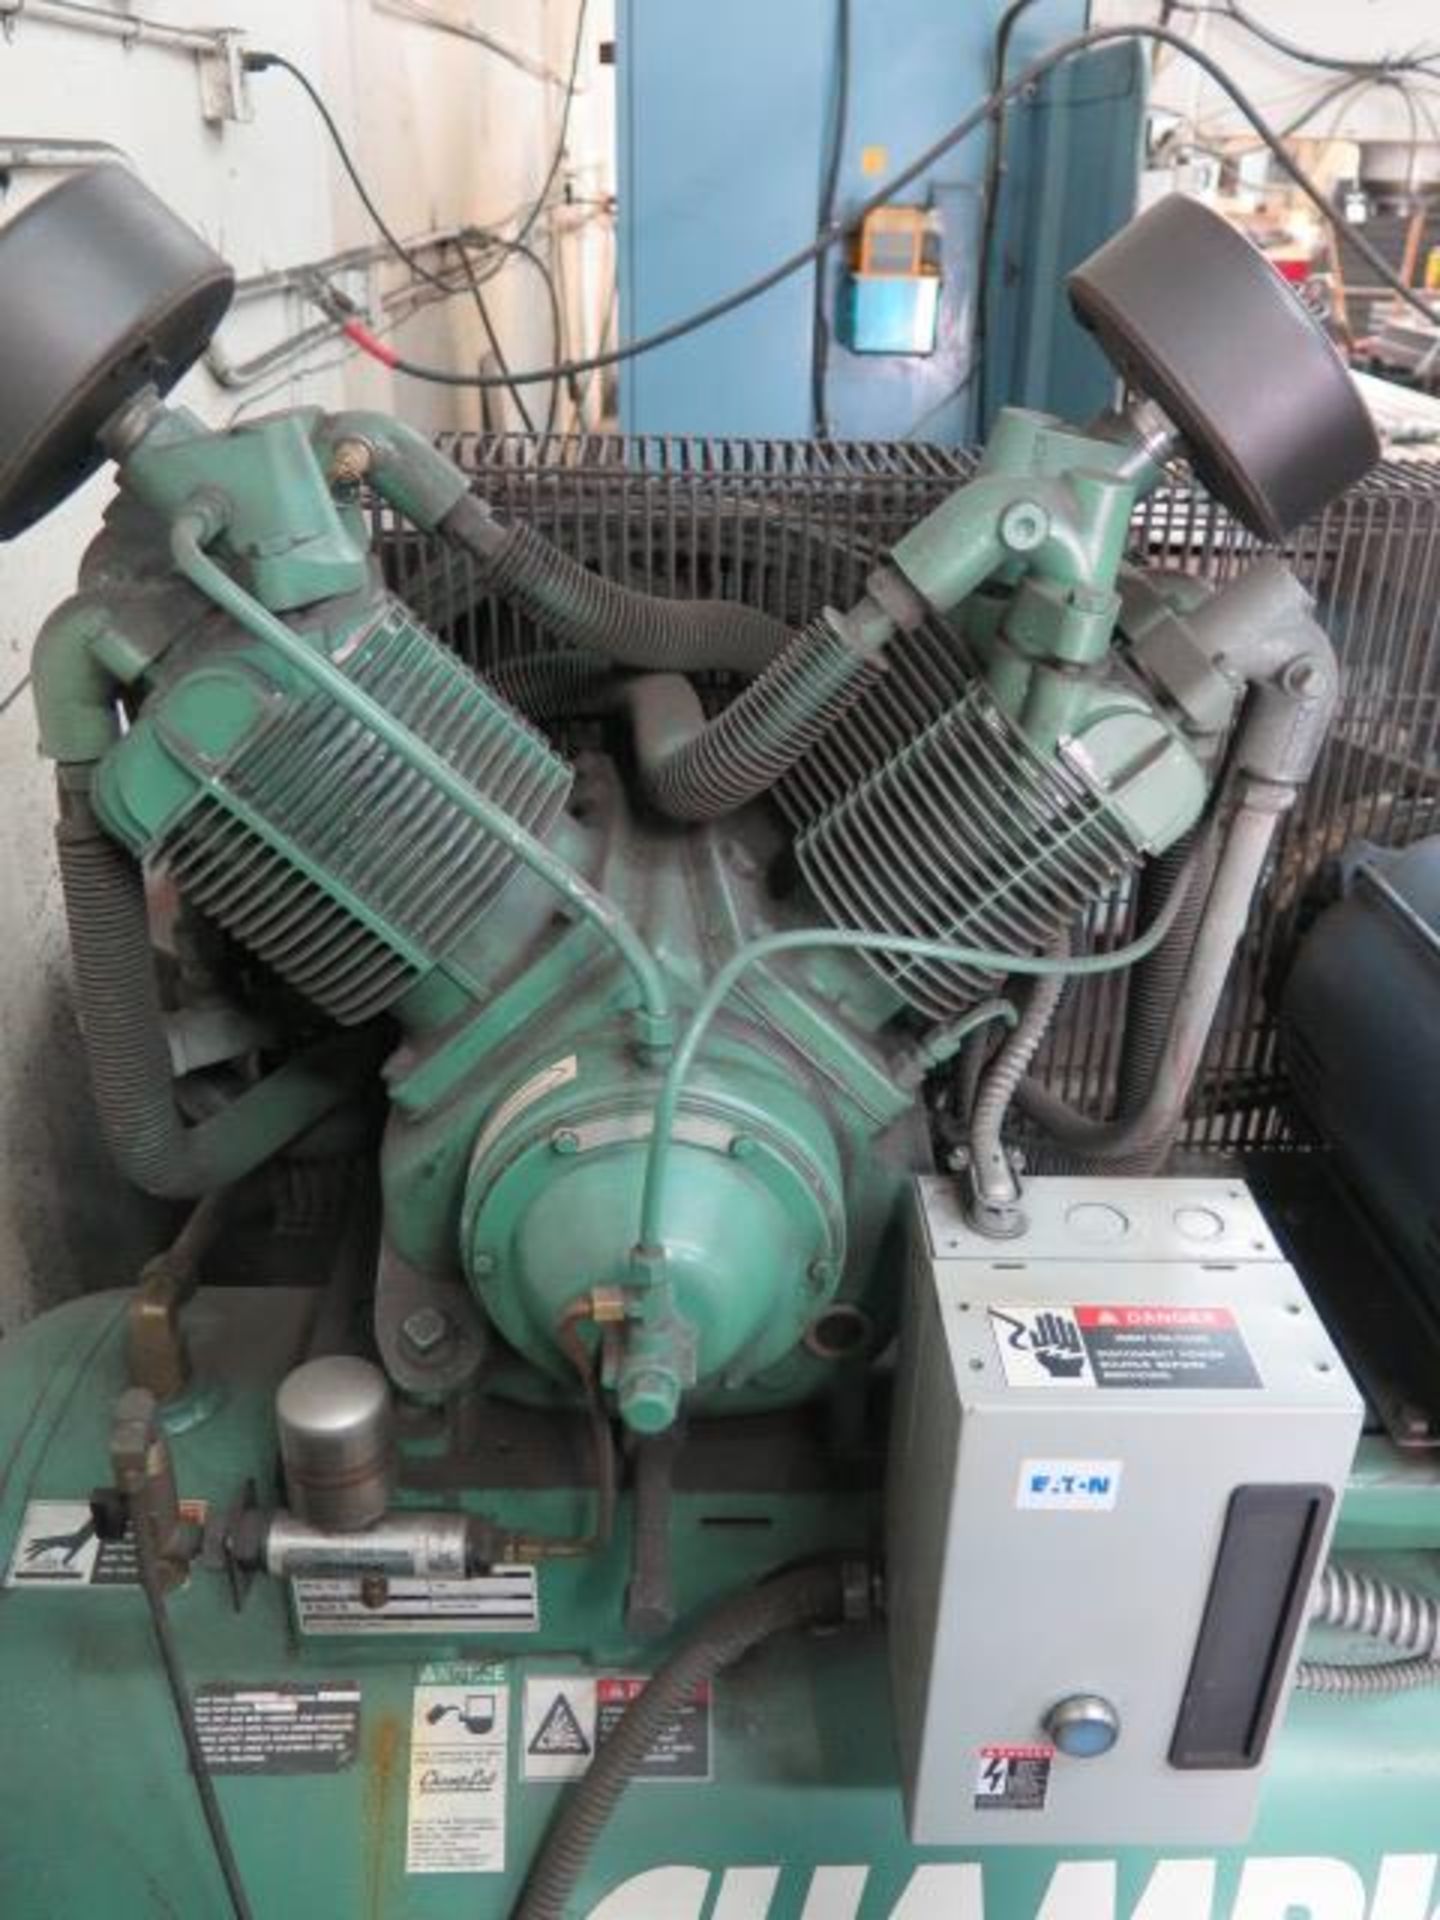 2017 Champion Advantage 7.5Hp Horizontal Air Compressor w/ 2-Stage Pump, 120 Gallon Tank (SOLD AS-IS - Image 5 of 12